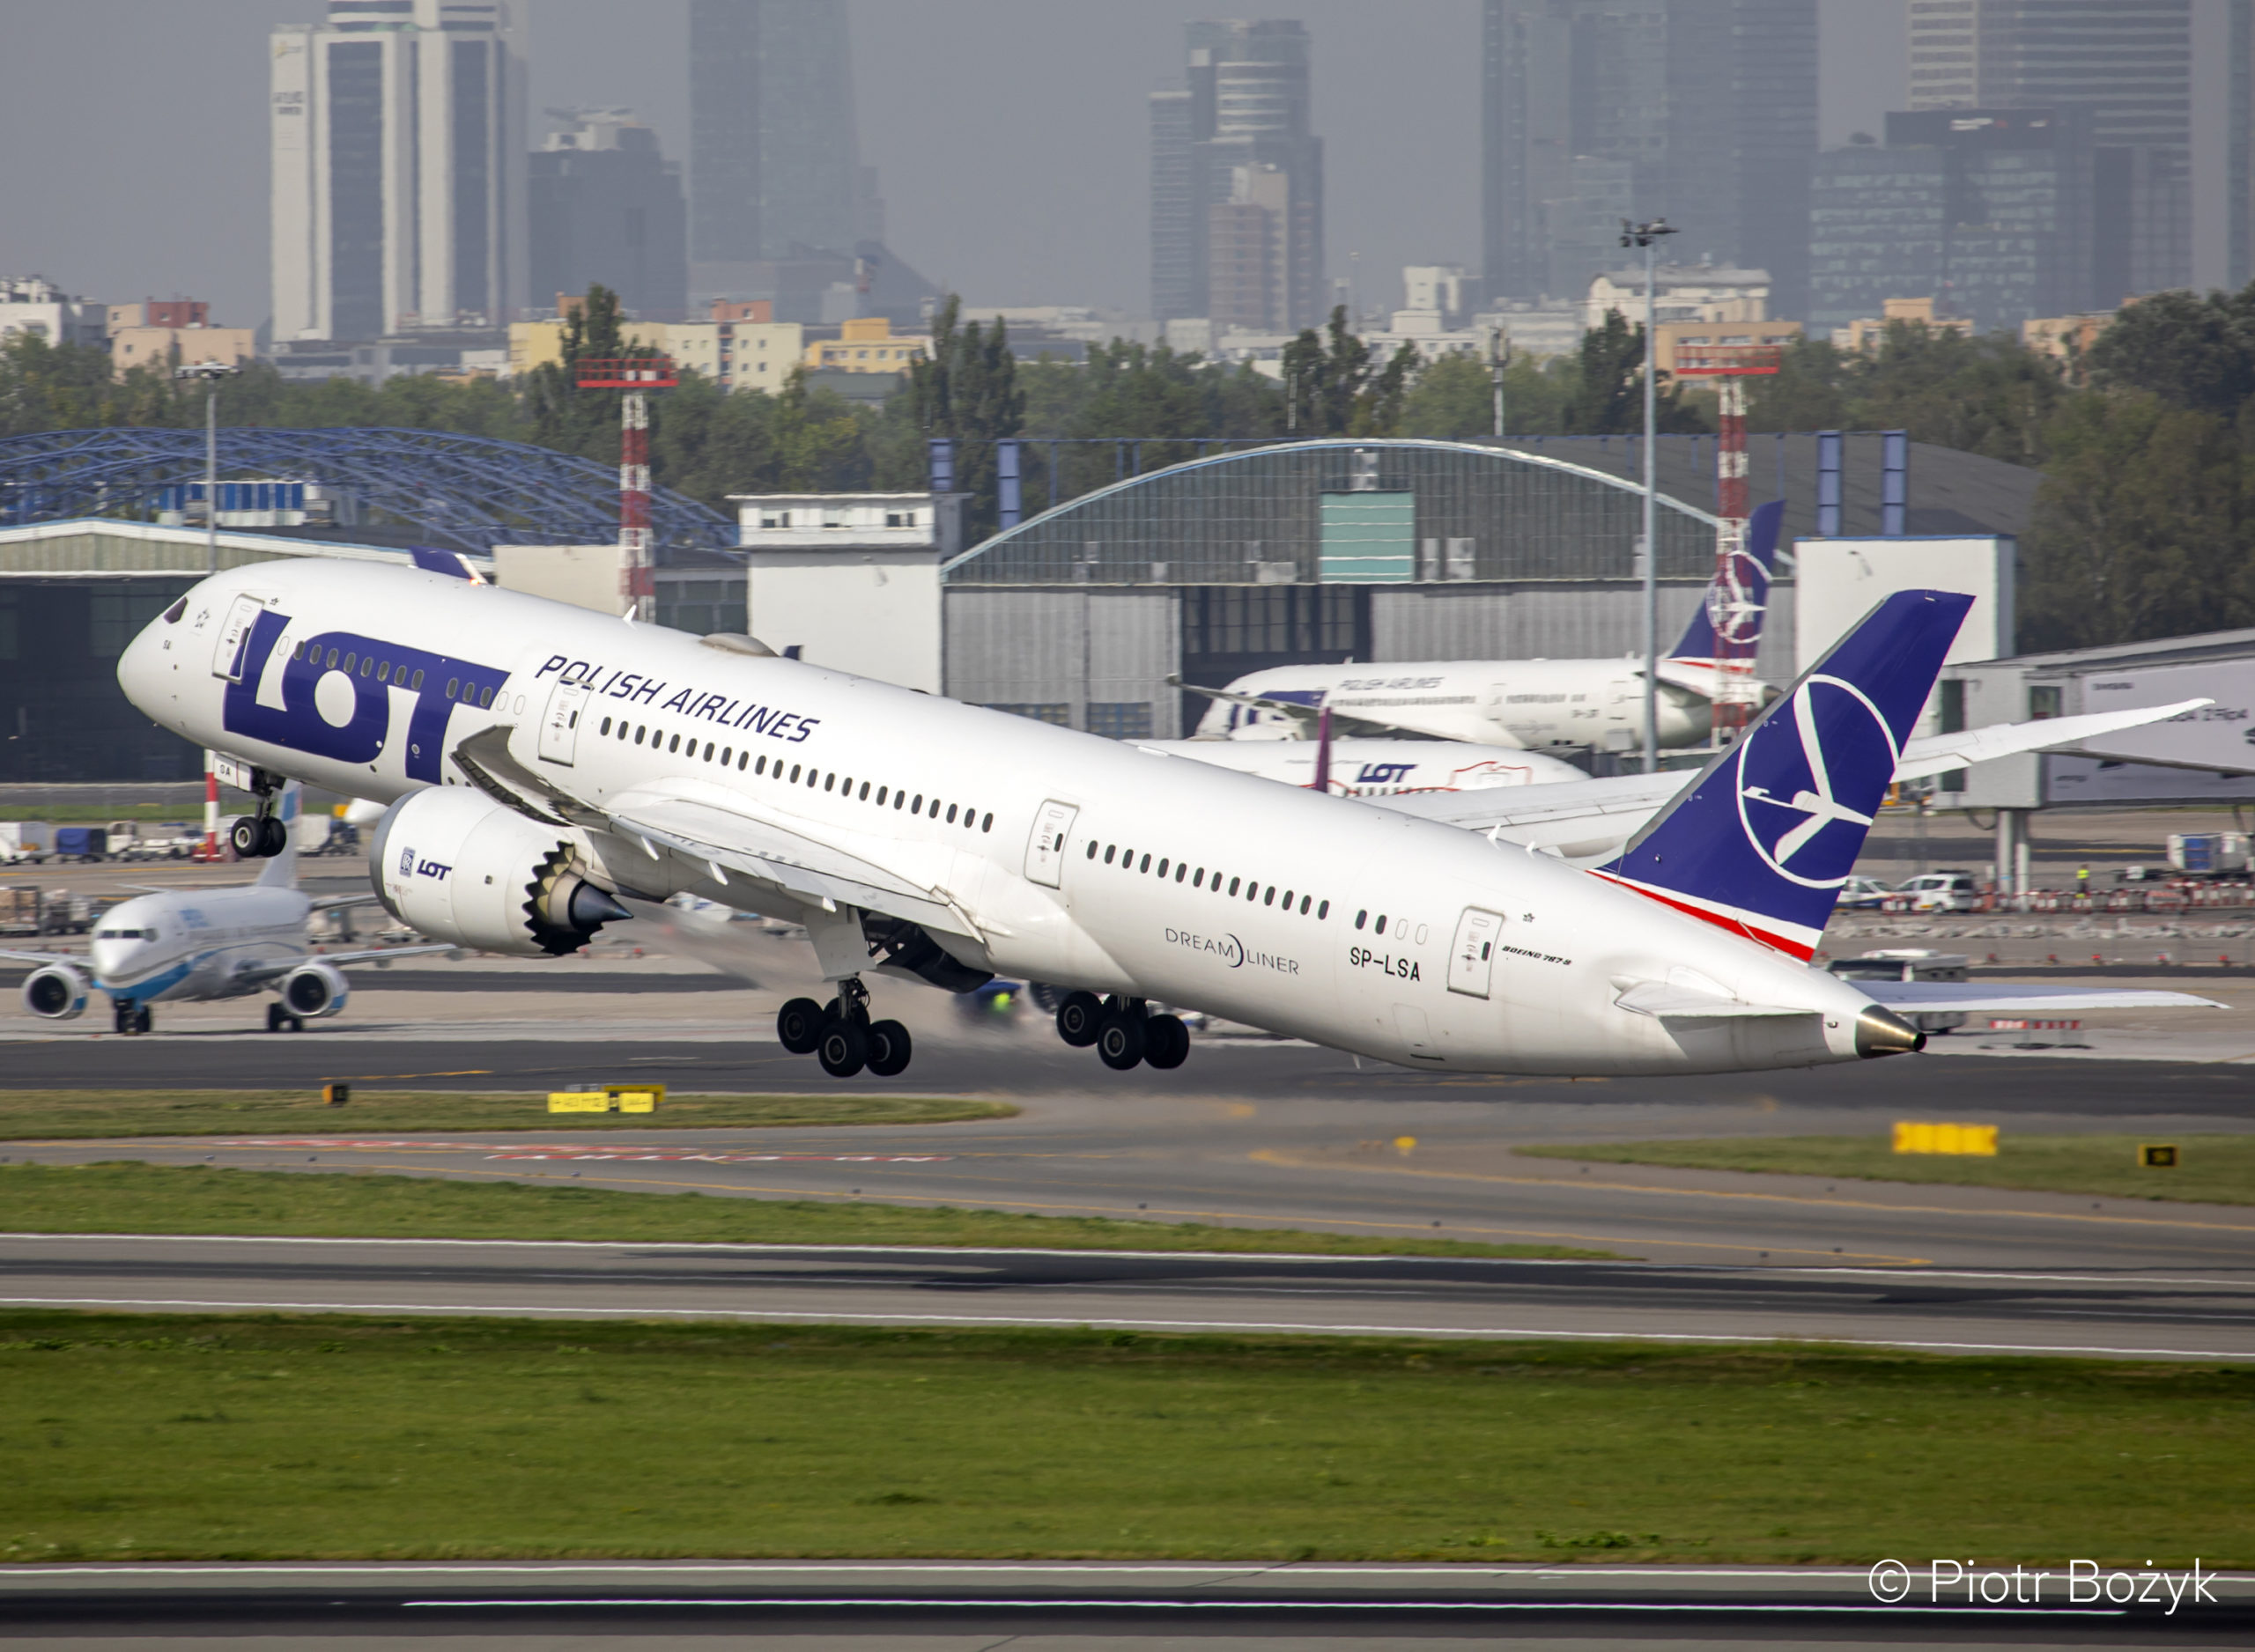 A LOT Polish Airlines flight taking off.